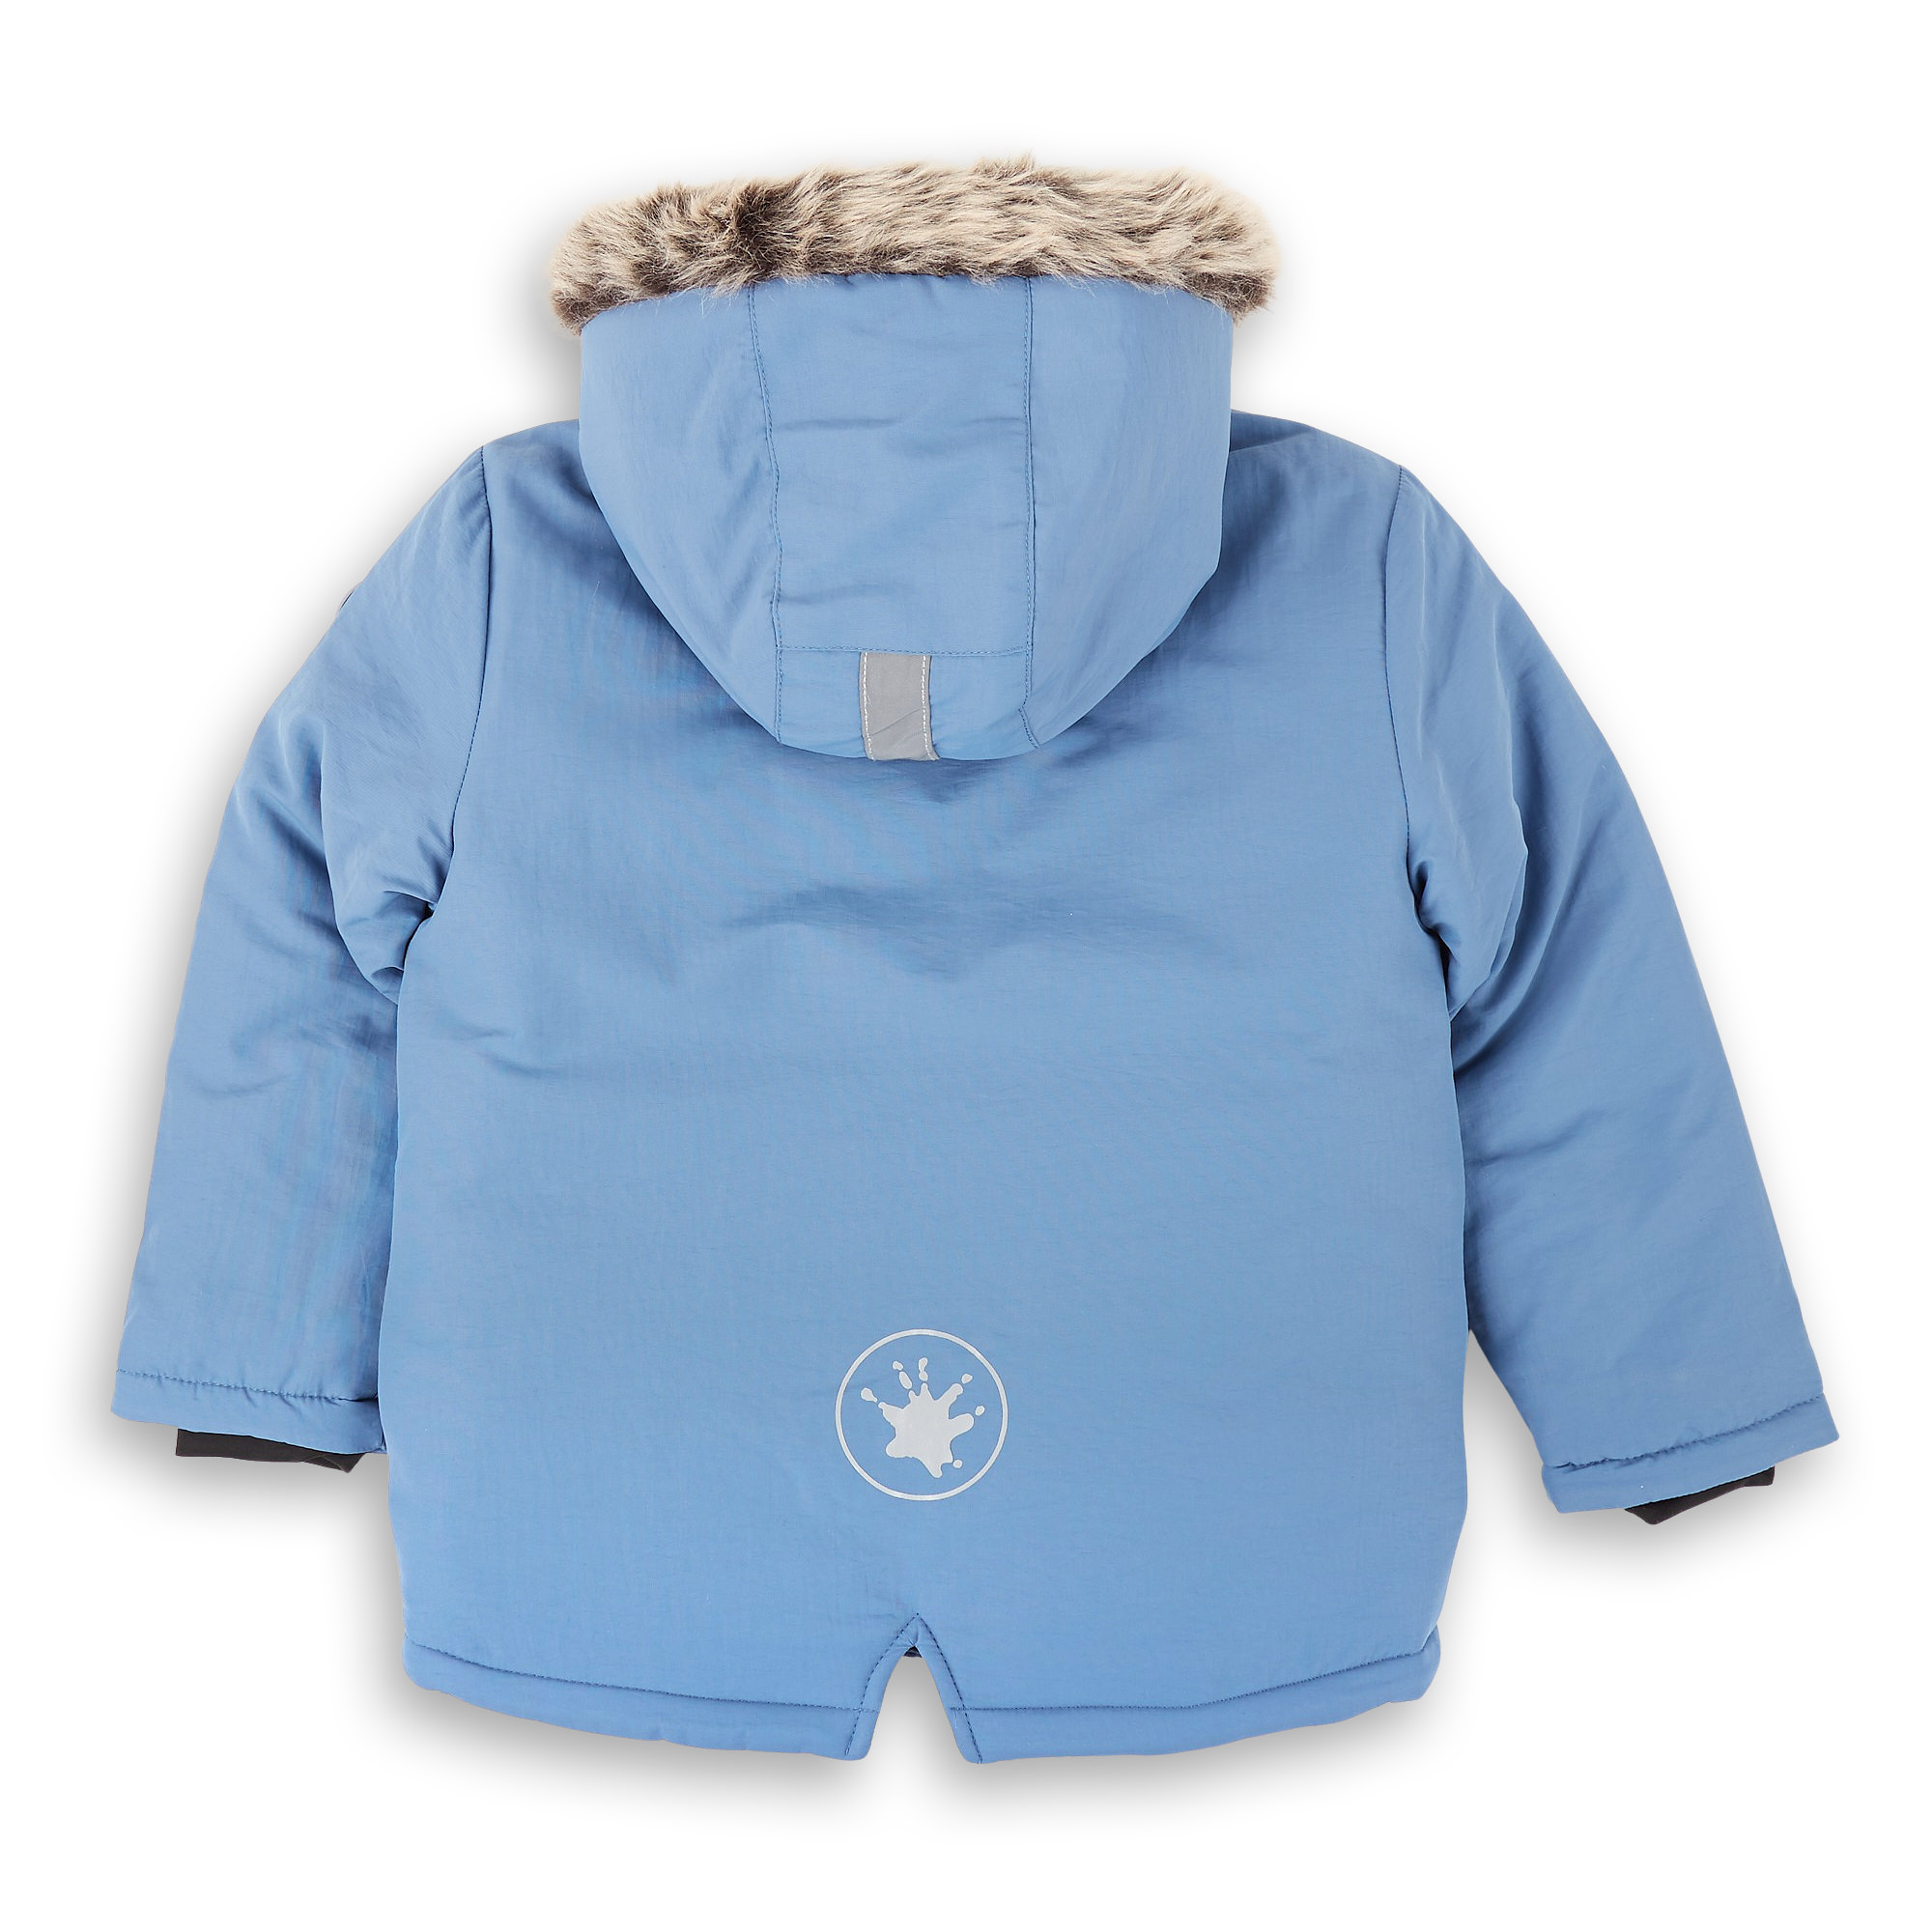 Insulated kids' winter jacket, hooded, blue